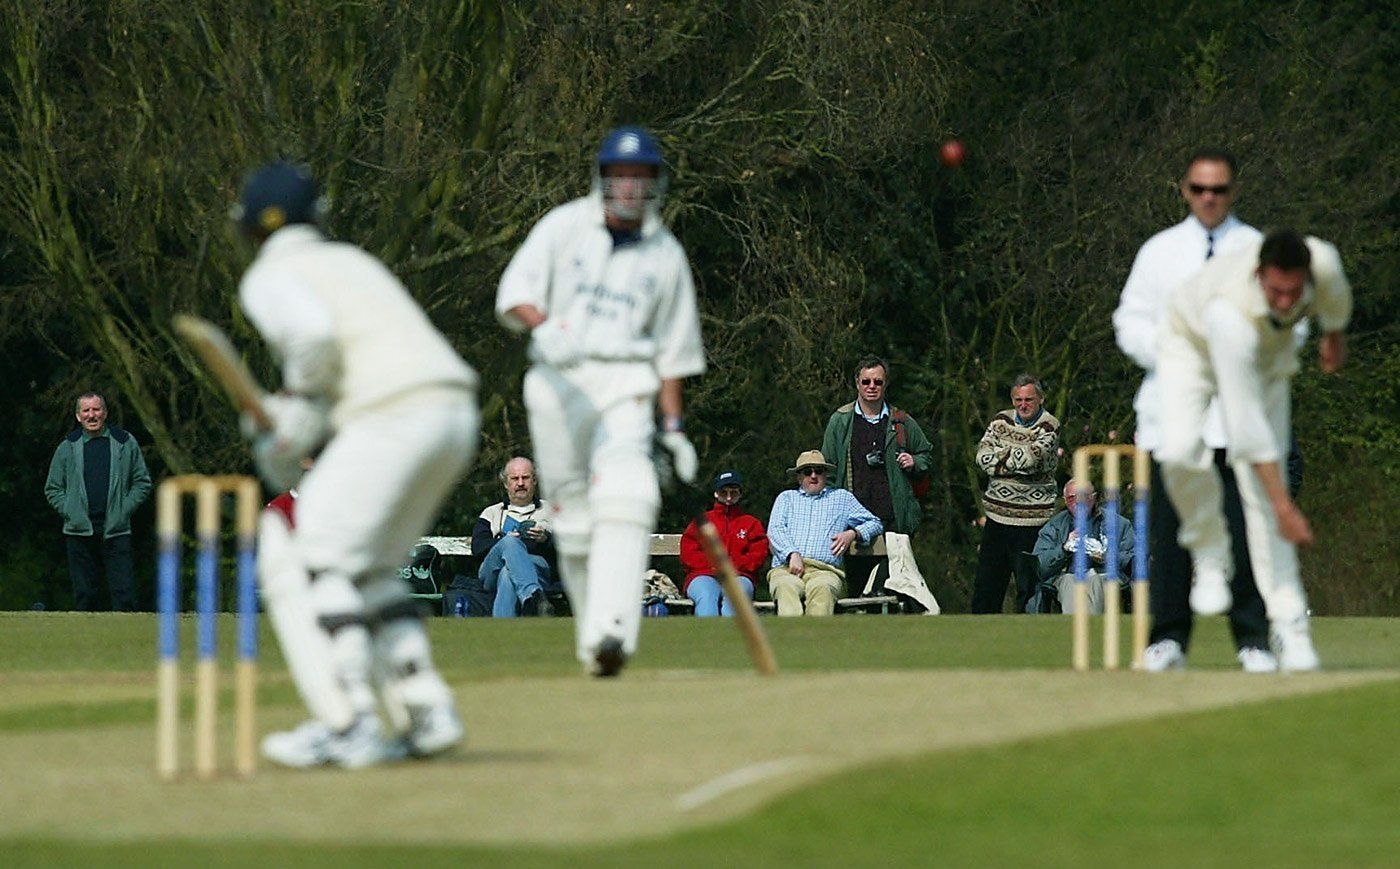 best of Professional Amateur cricketers